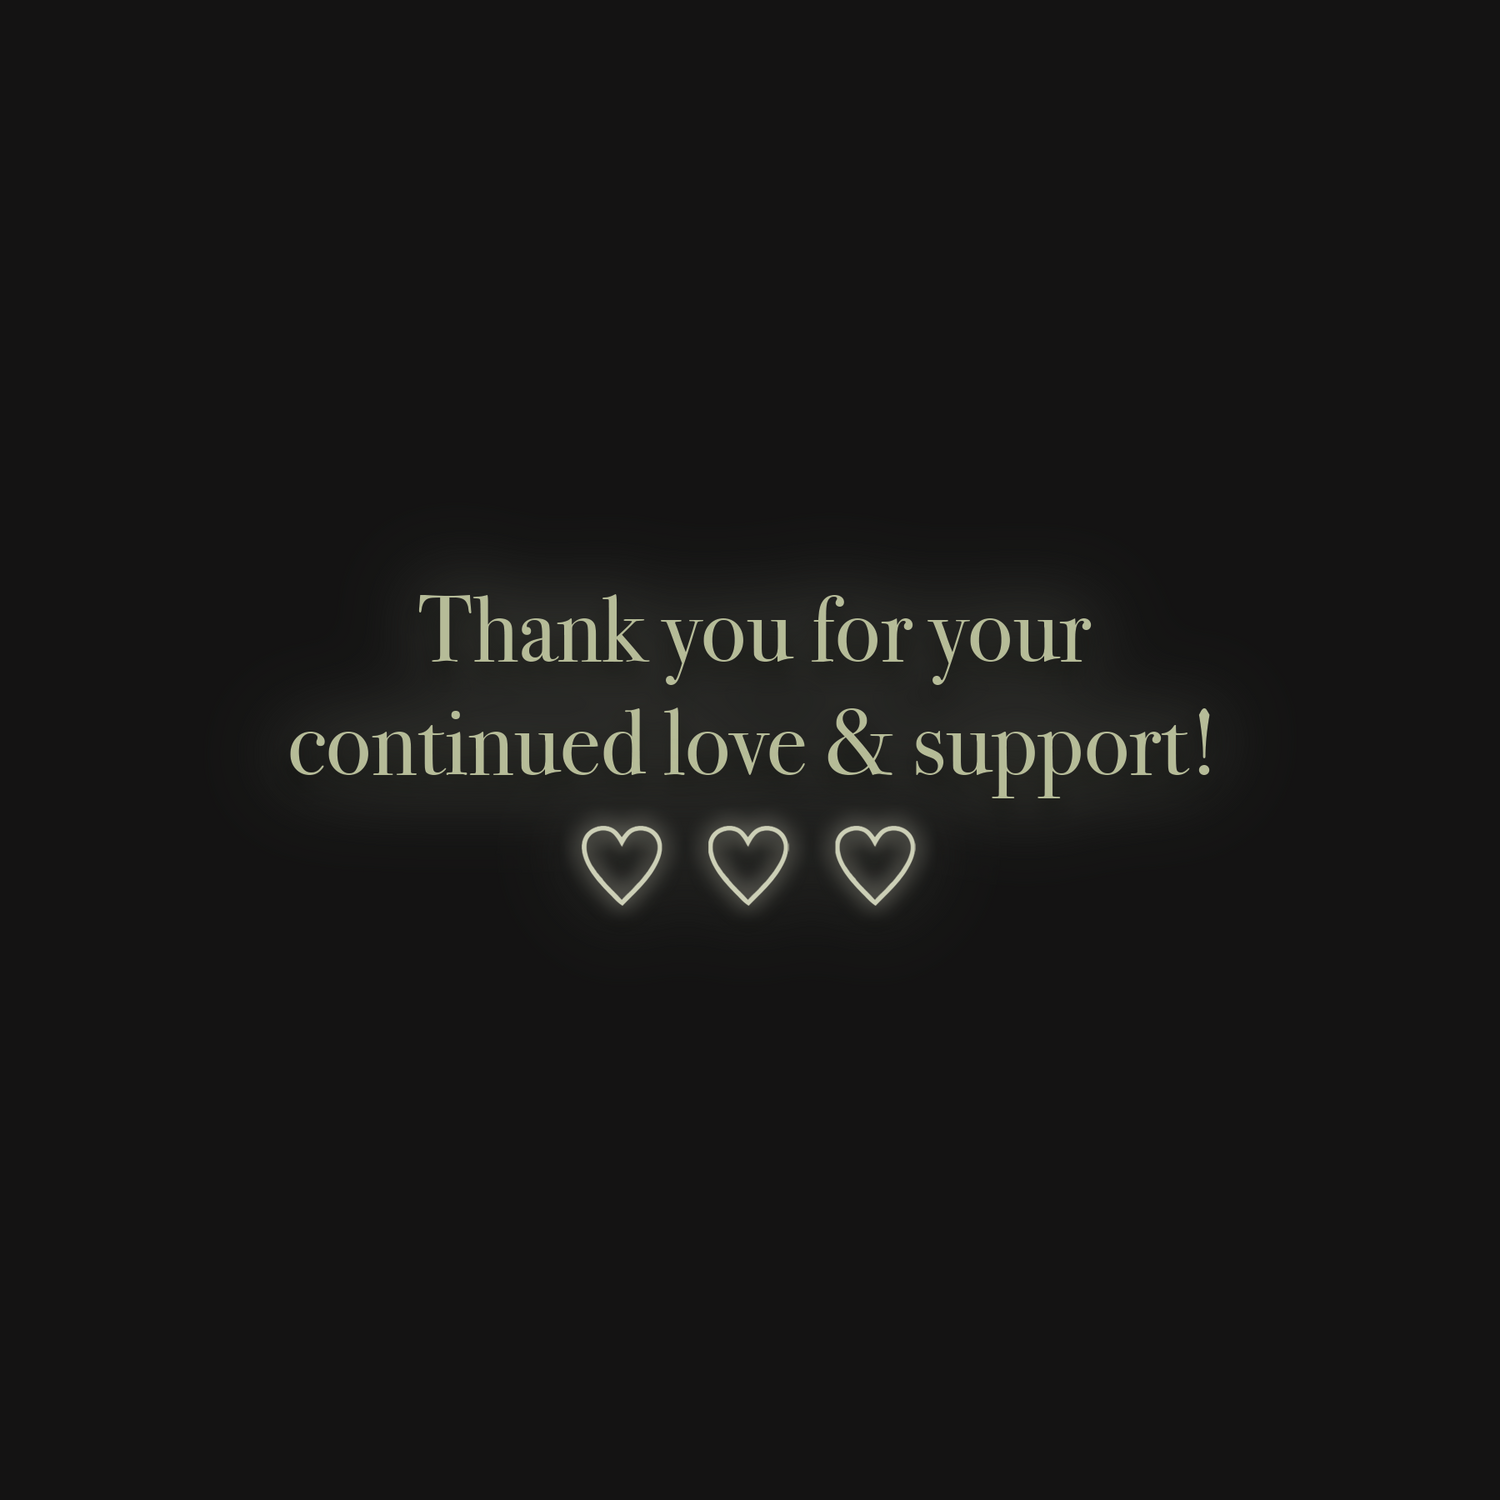 thank you for your continued love & support!